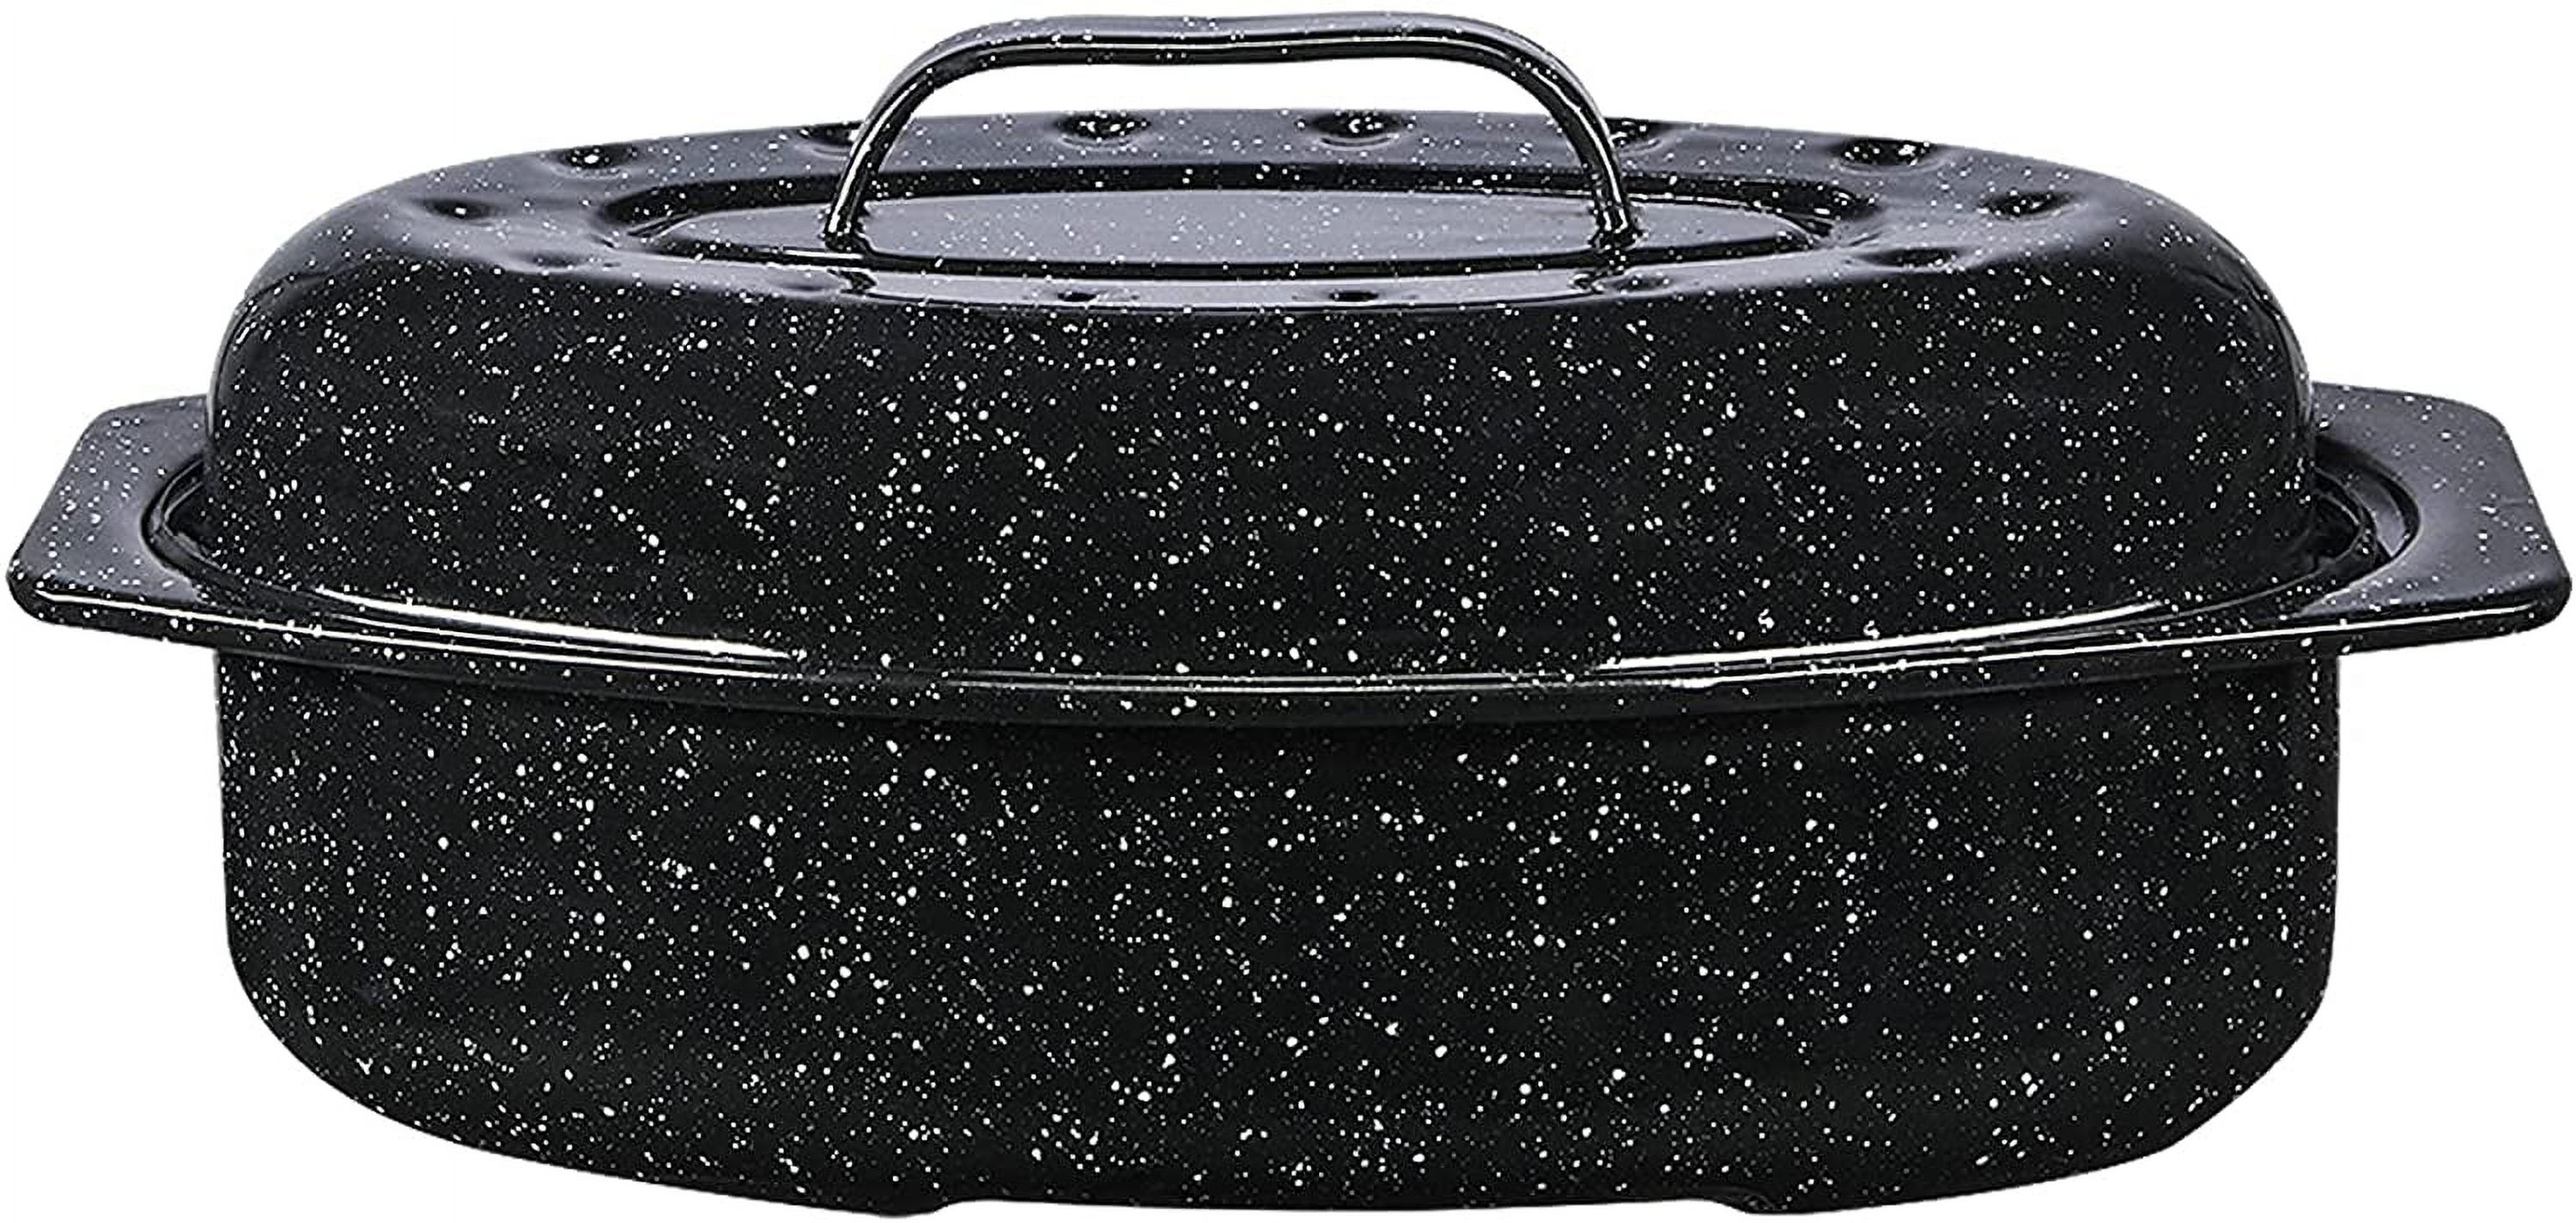 Granite Ware 13 inch oval roaster with Lid. Enameled steel design to accommodate up to 7 lb poultry/roast. Resists up to 932°F - image 1 of 7